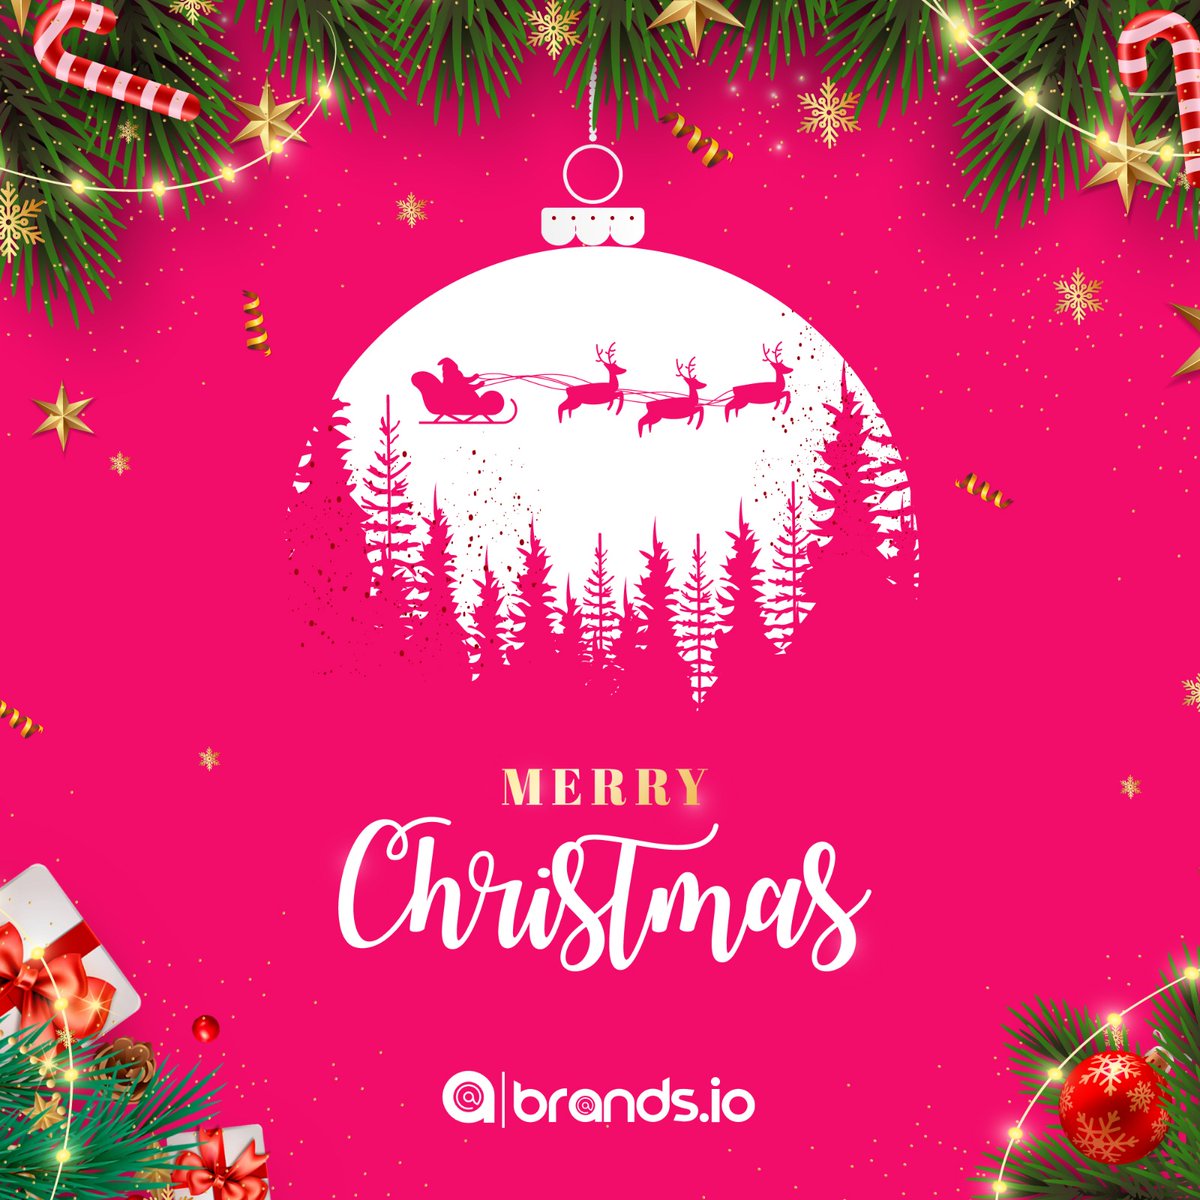 🎄✨ 'Tis the season to sparkle! 🌟 Braands.io wishes you a Merry Christmas filled with joy, love, and unforgettable moments. May your day be merry and bright! 🎁🎅 #ChristmasCheer #CelebrateWithBraands #JoyfulMoments #braands #crypto #NFT